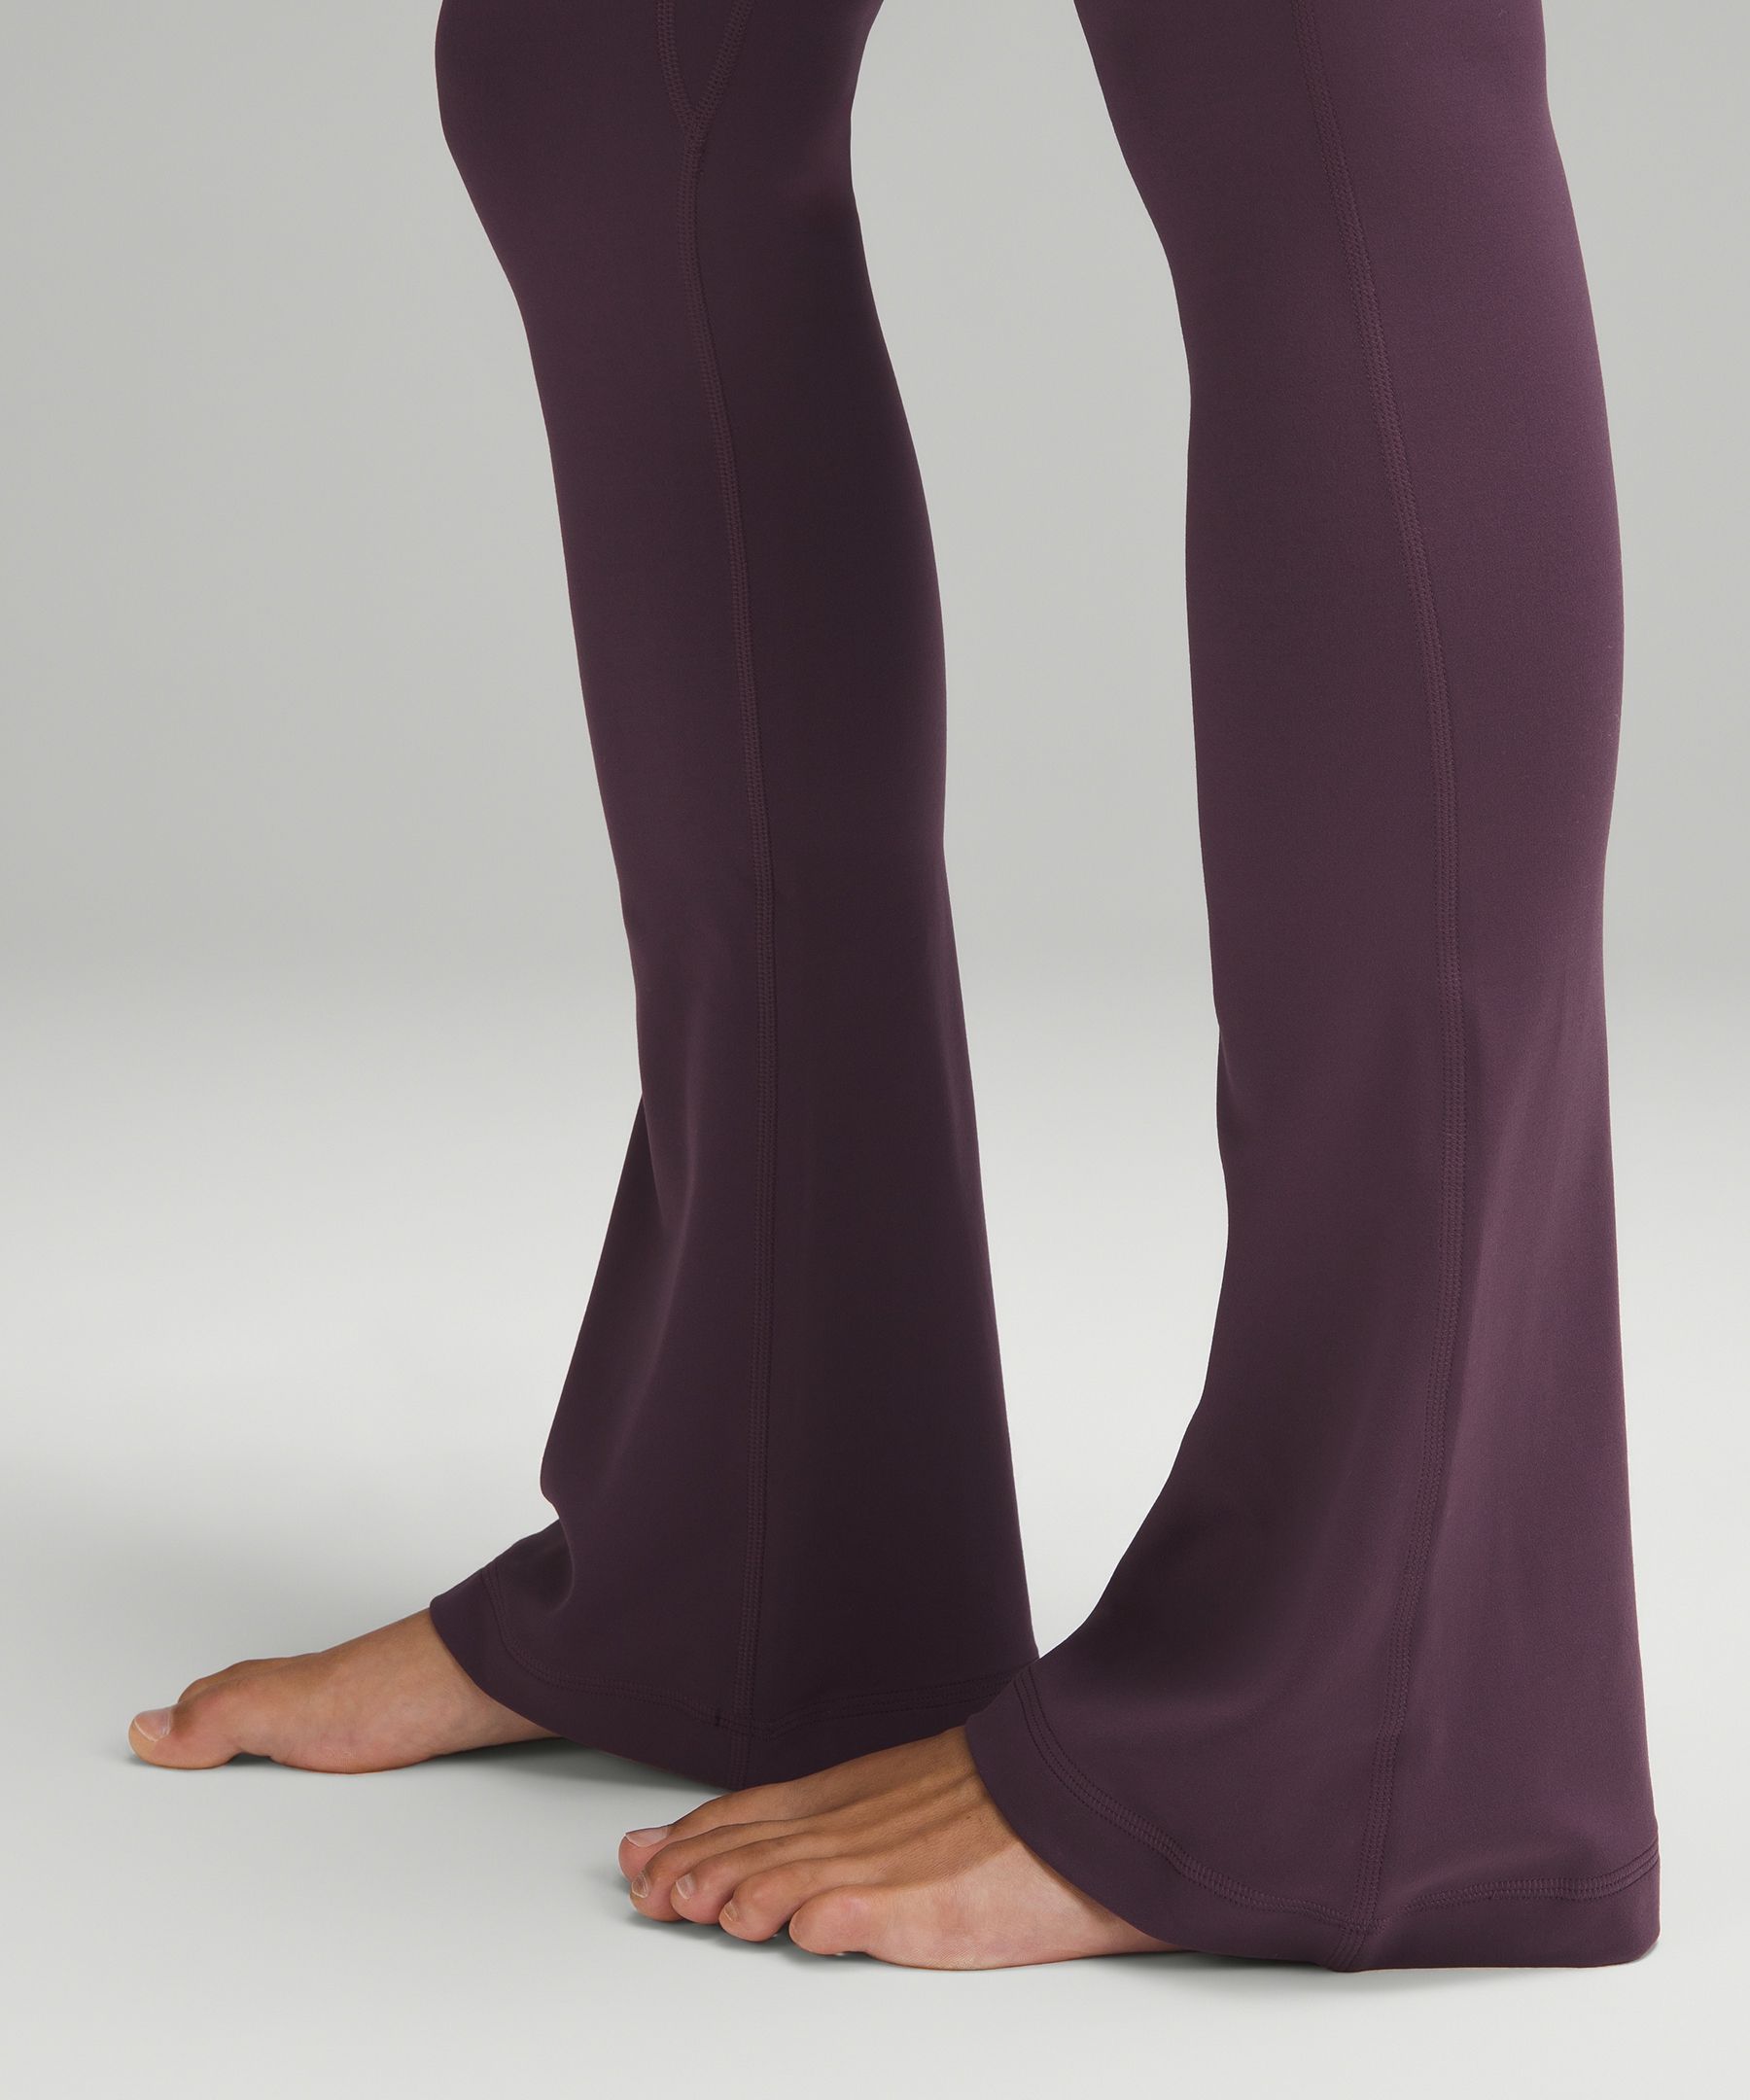 If you are a tall girl, you NEED these pants… thank me later 🤌🏻 #chr, lululemon  mini flare